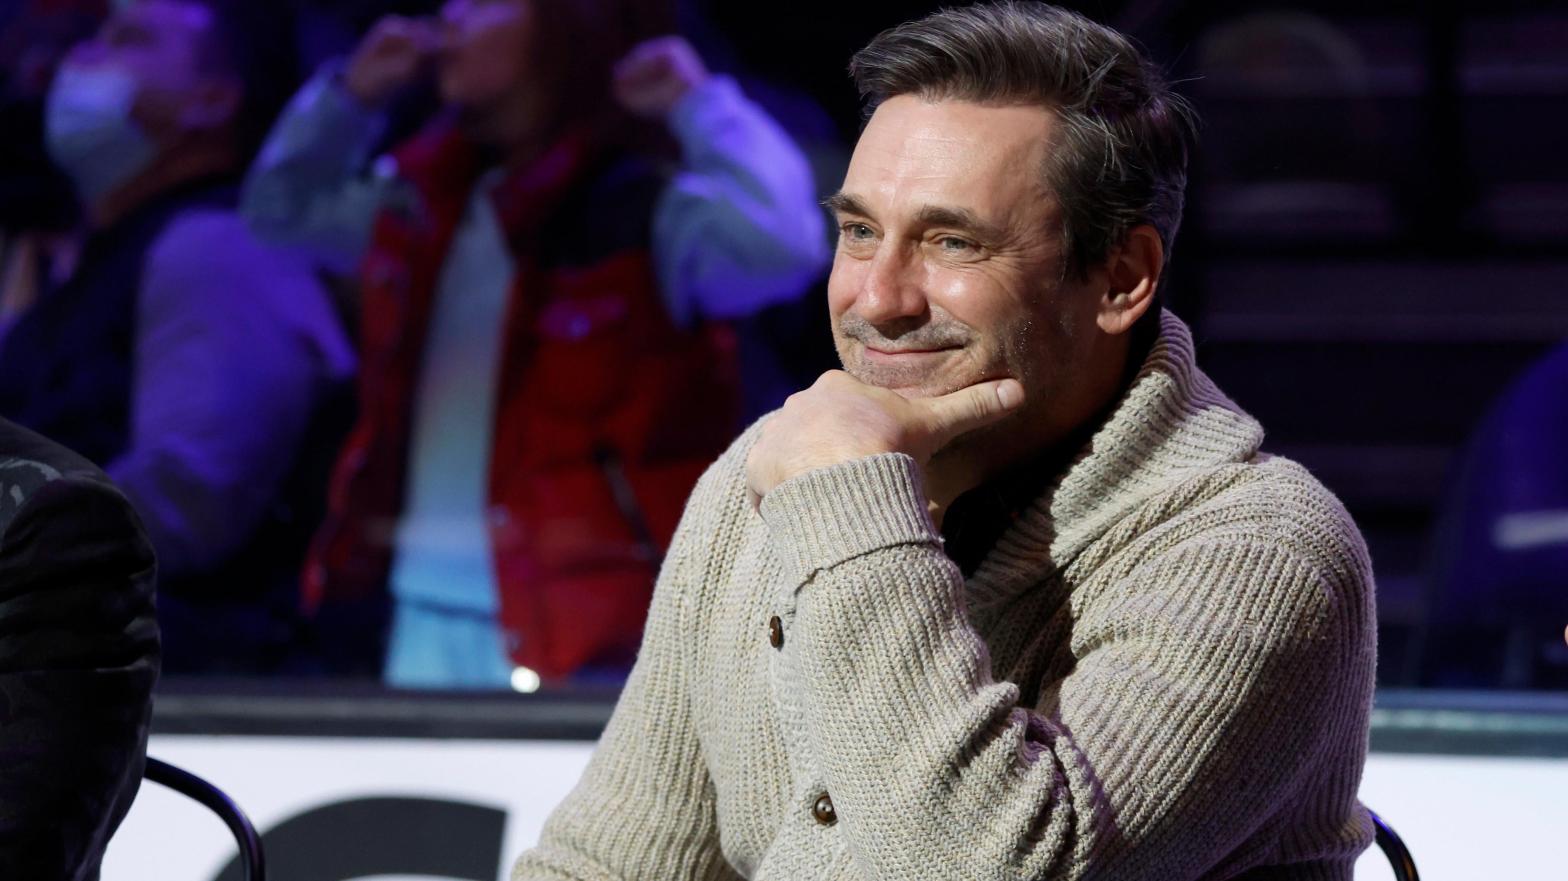 Jon Hamm at the 2022 NHL All-Star Weekend on February 04, 2022 in Las Vegas, Nevada.  (Photo: Christian Petersen, Getty Images)